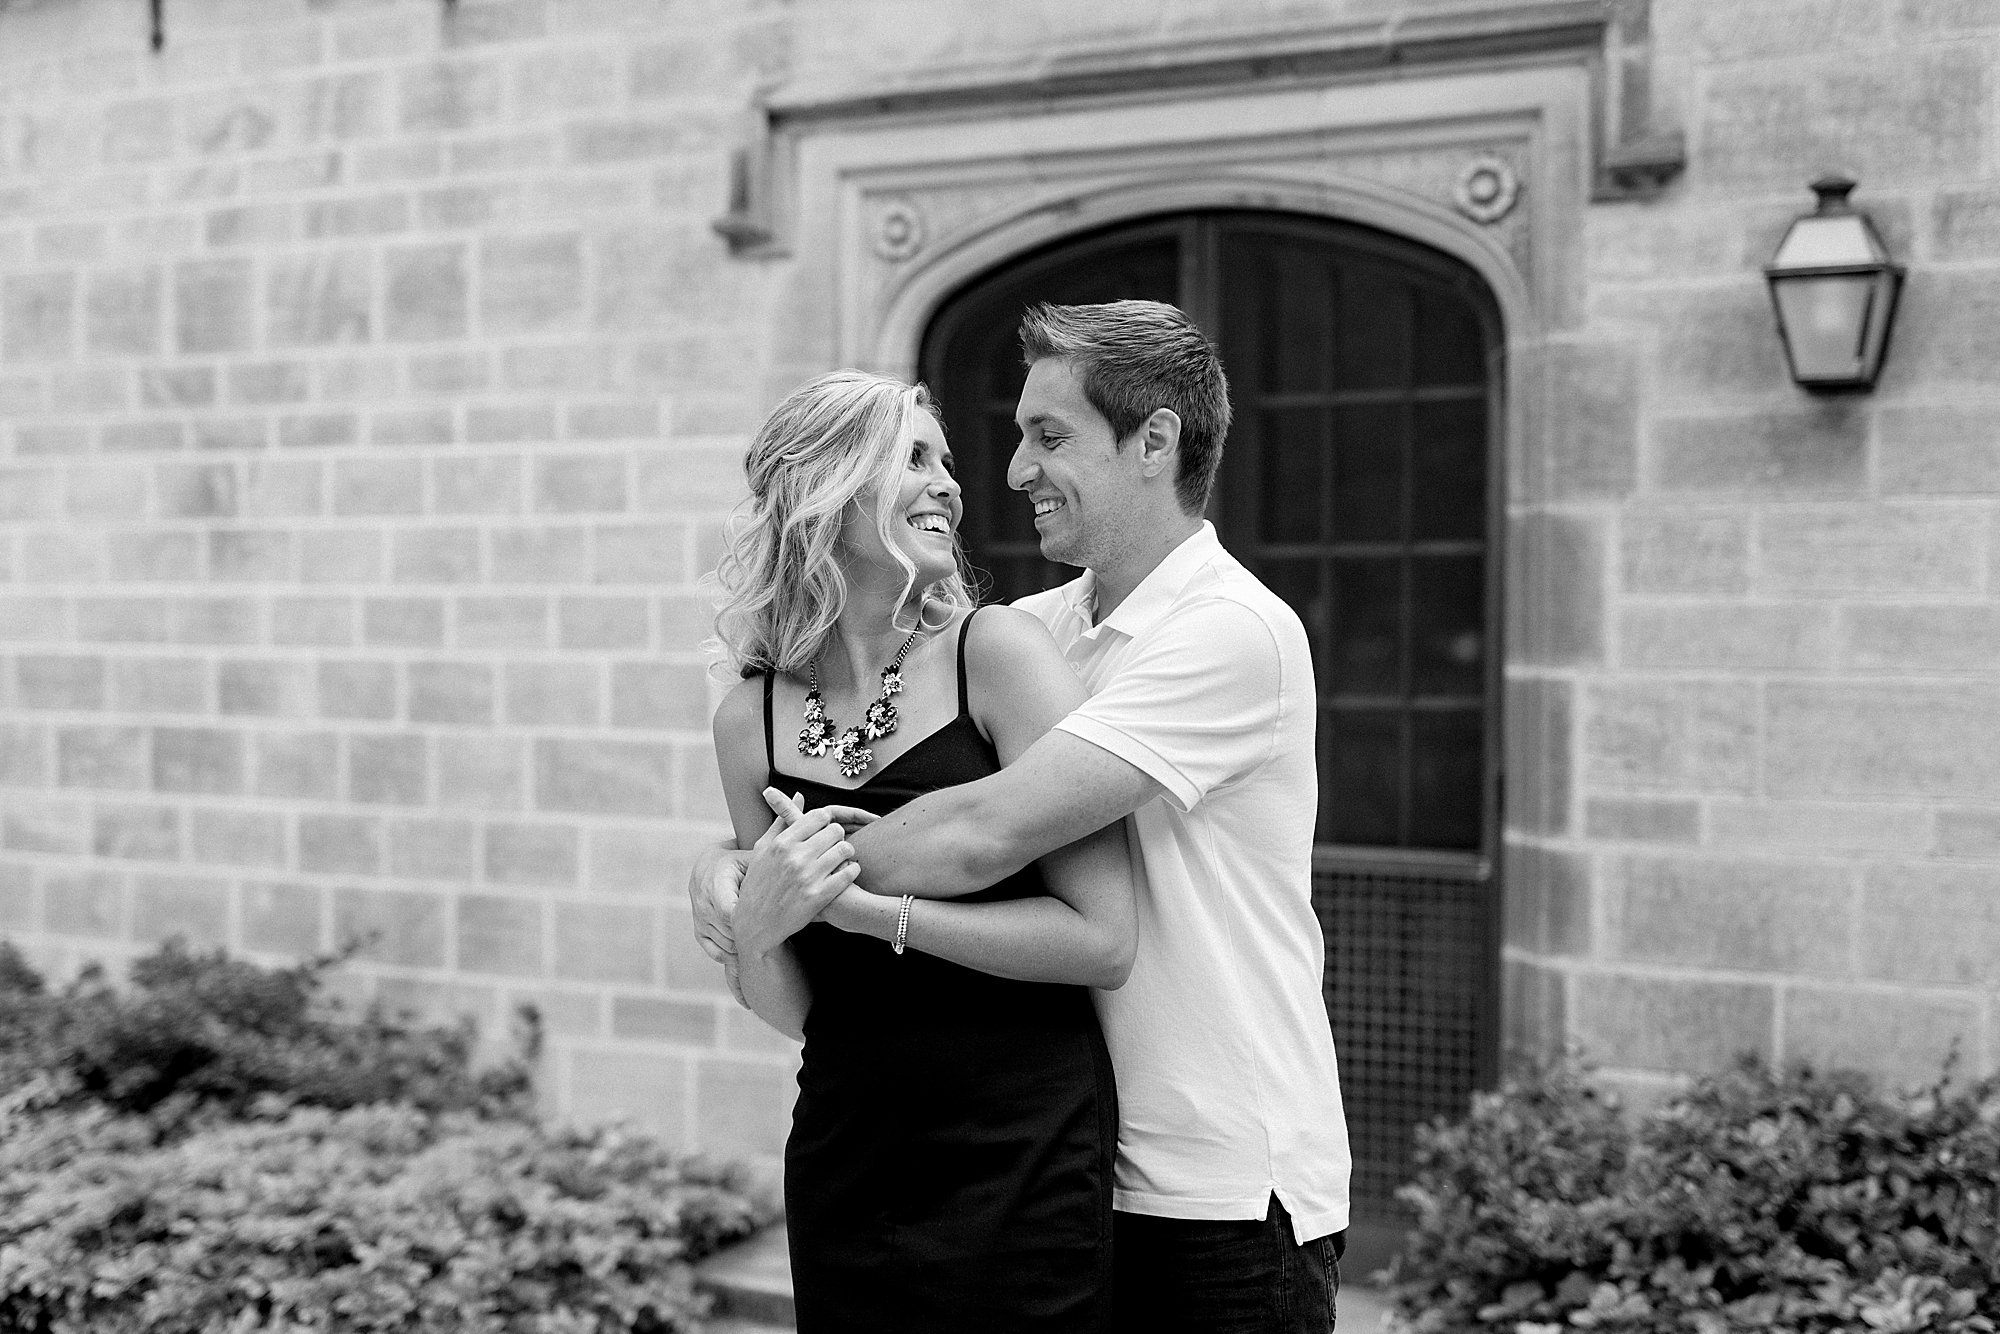 A classic late summer engagement session at the Edsel and Eleanor Ford House in Grosse Pointe, Michigan by Breanne Rochelle Photography.